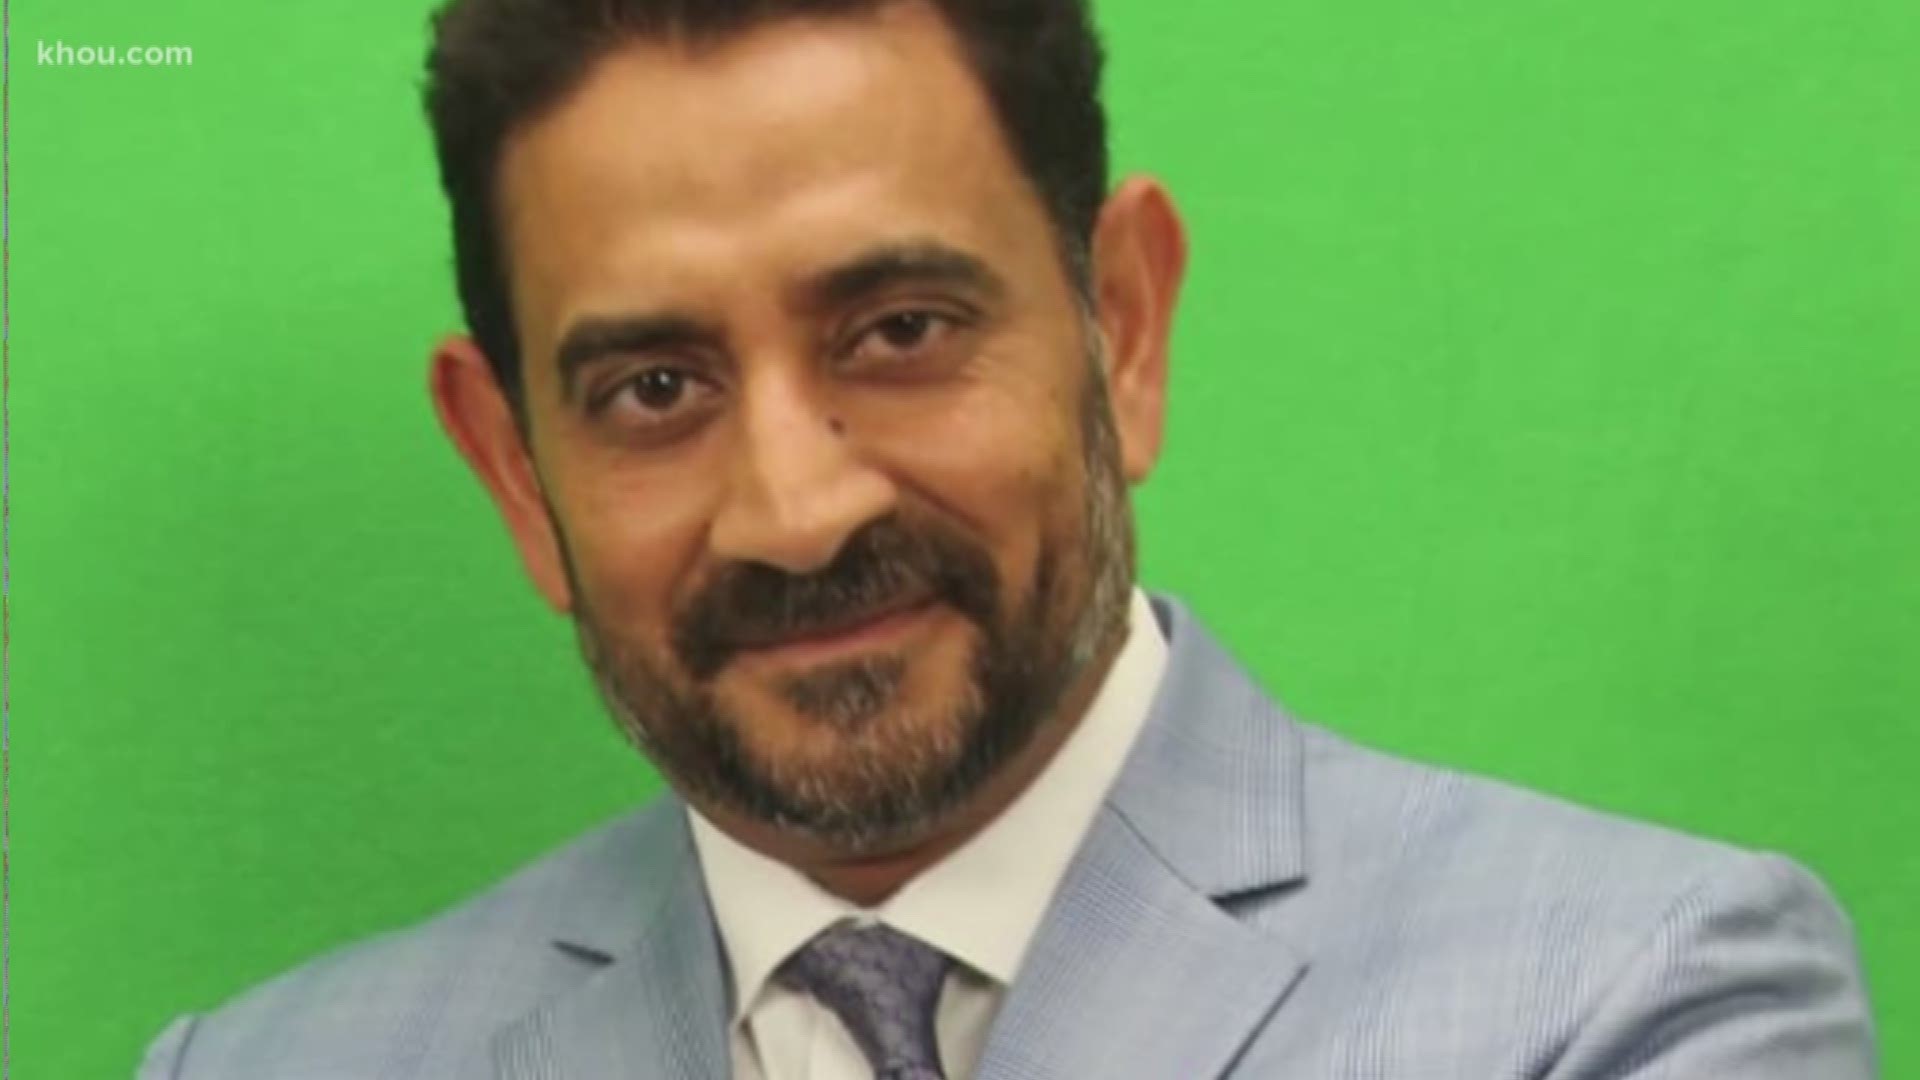 Khurram Ibrahim died in a terrible crash on the Southwest Freeway Tuesday. Khurram Ibrahim was a leading voice in the Houston community and has done a lot to bring cricket to Houston.